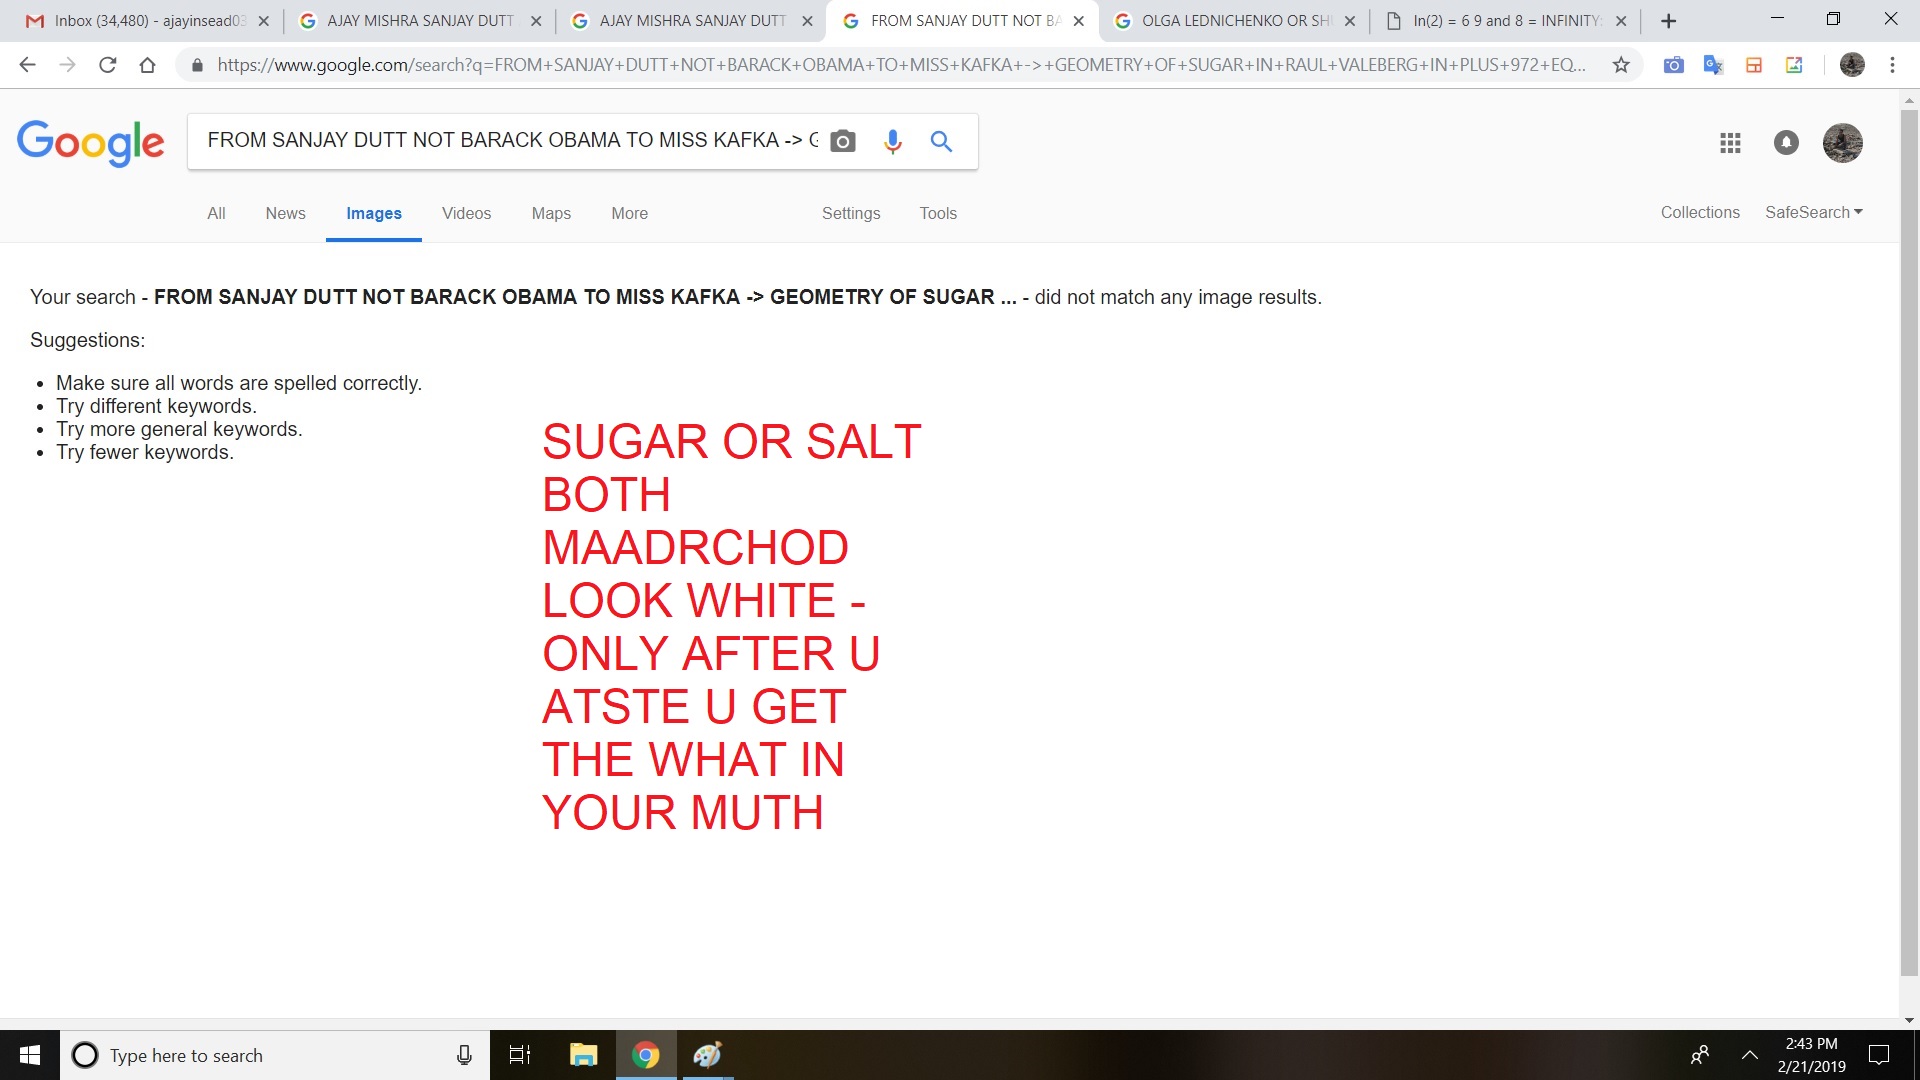 SUGAR OR SALT BOTH MAADRCHOD LOOK WHITE - ONLY AFTER U ATSTE U GET THE WHAT IN YOUR MUTH